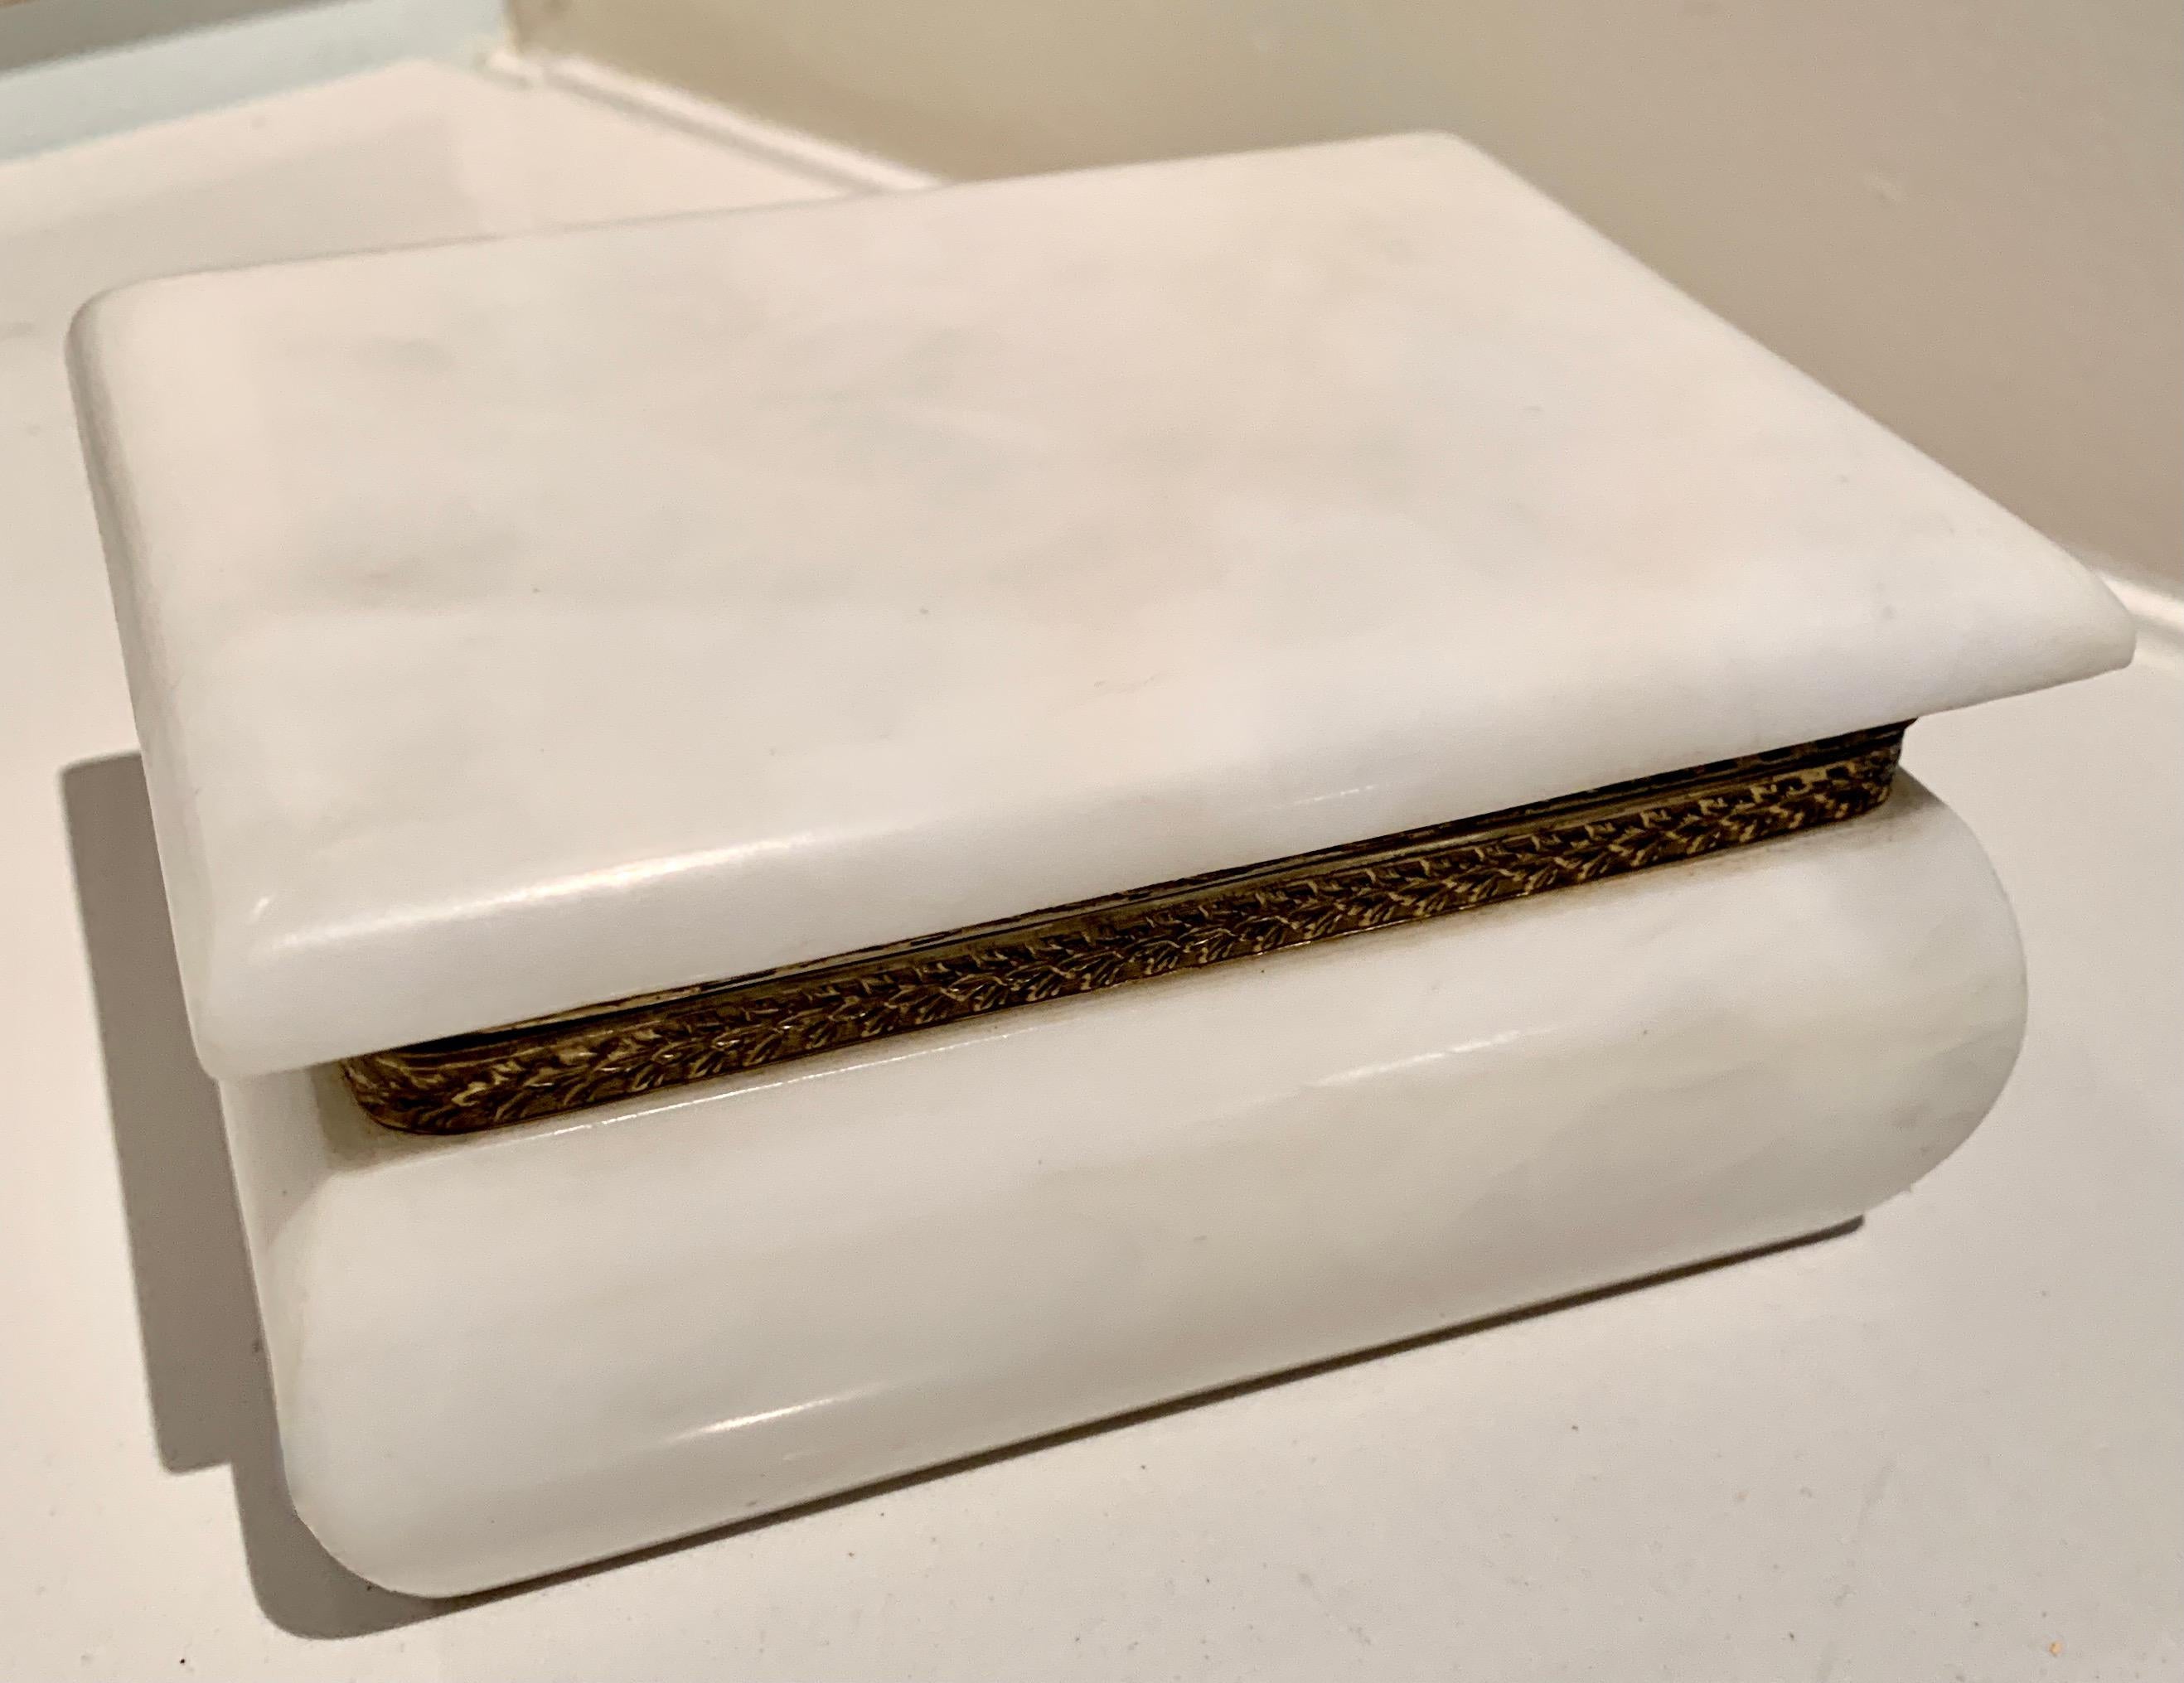 Elegant white Alabaster box with detailed brass hinged surround. A great piece for any vanity or dressing table. The clean look of alabaster compliments any environment, from Ultra Modern to the most traditional. 

A trinket box perfect for those